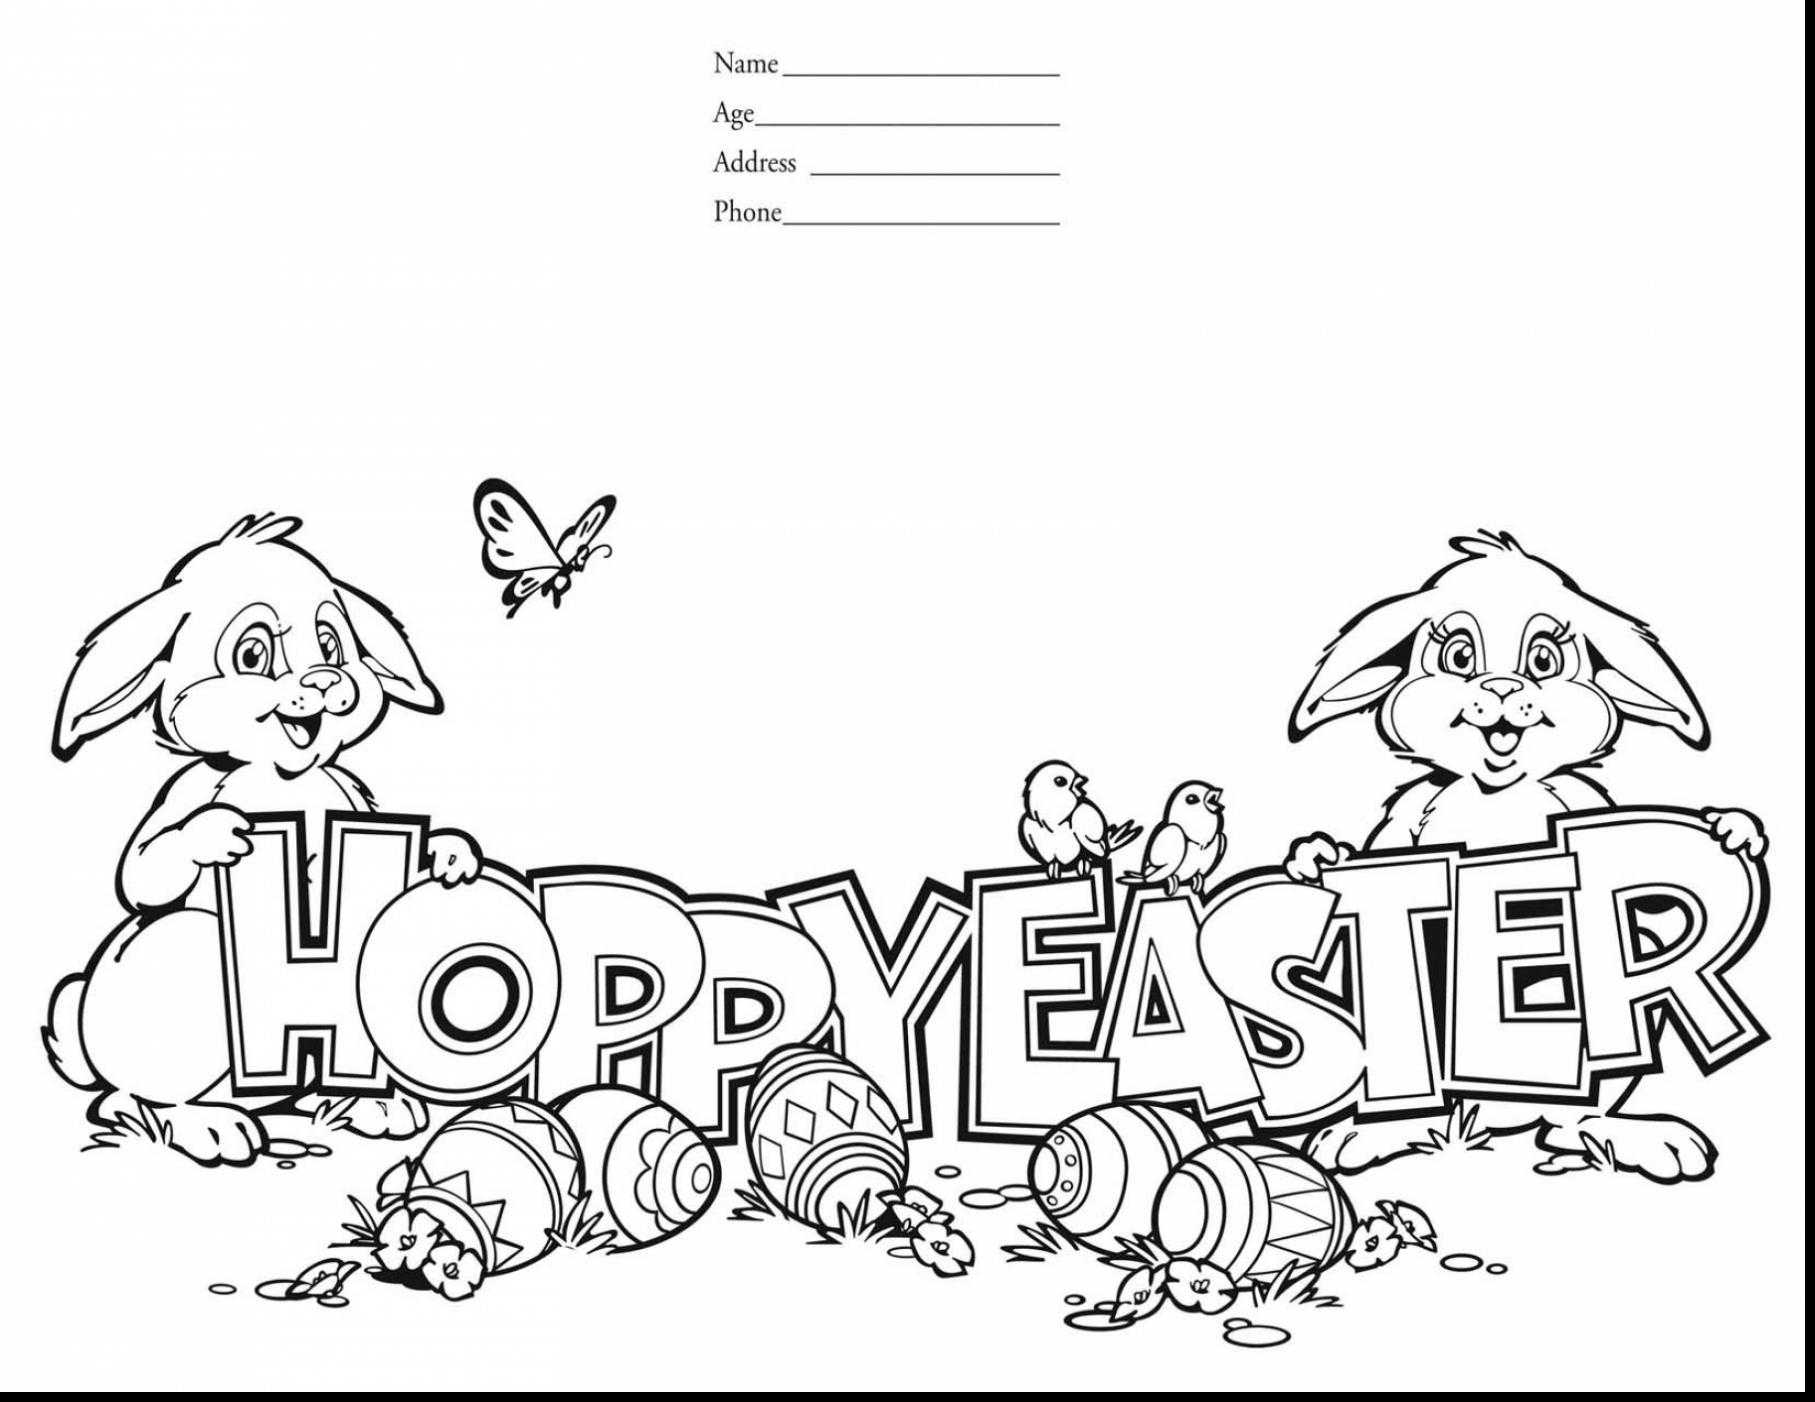 Top 19 Hunky Dory Easter Bunny Coloring Pages Prinzessin Pertaining To Blank Face Template Preschool